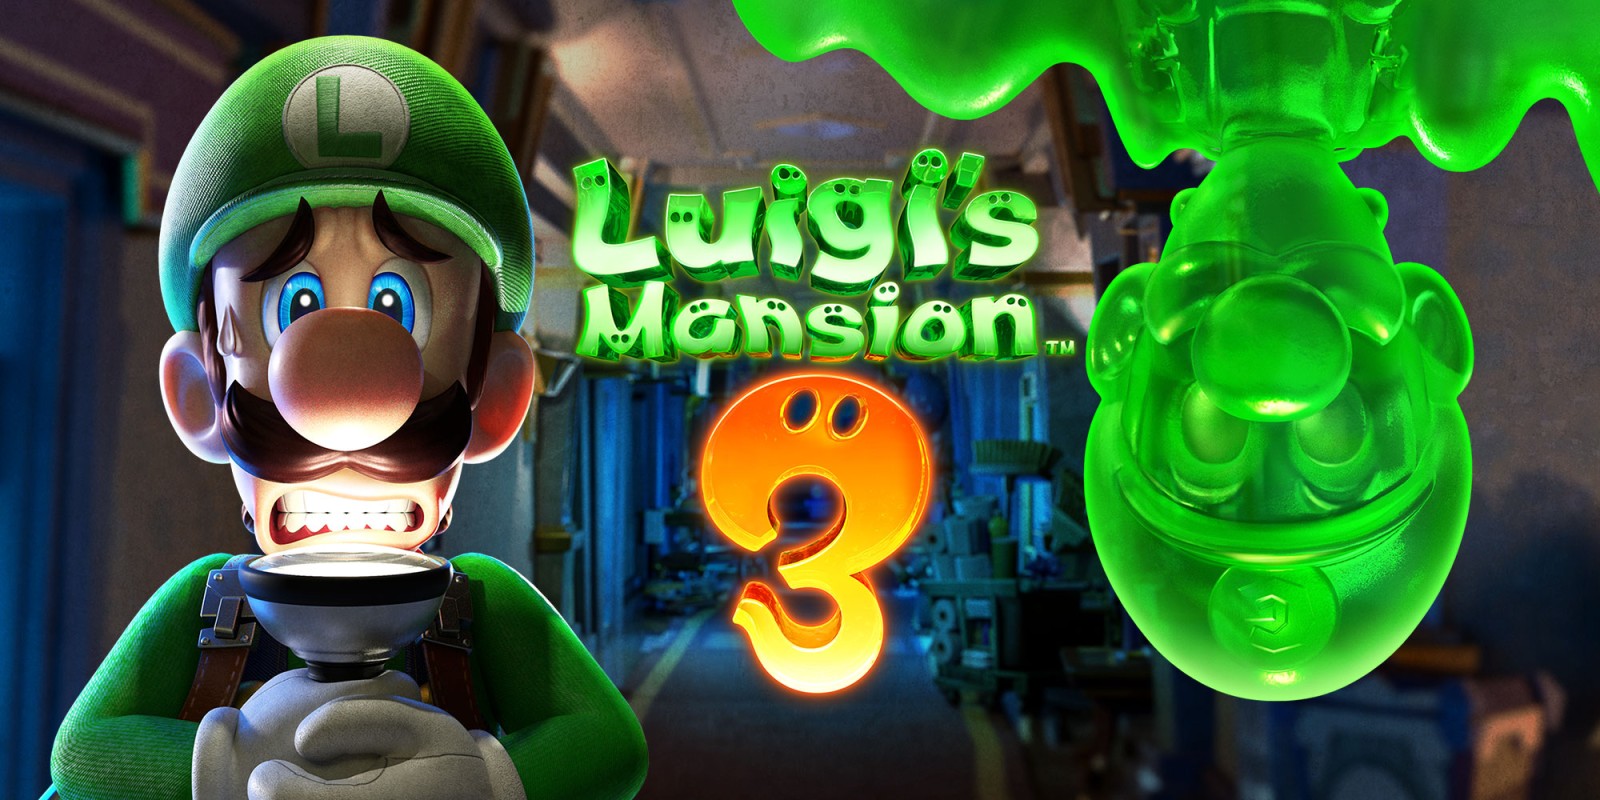 Nintendo Has Declared October 2019 As The Month Of Luigi In Celebration Of The Upcoming Launch Of Luigi’s Mansion 3